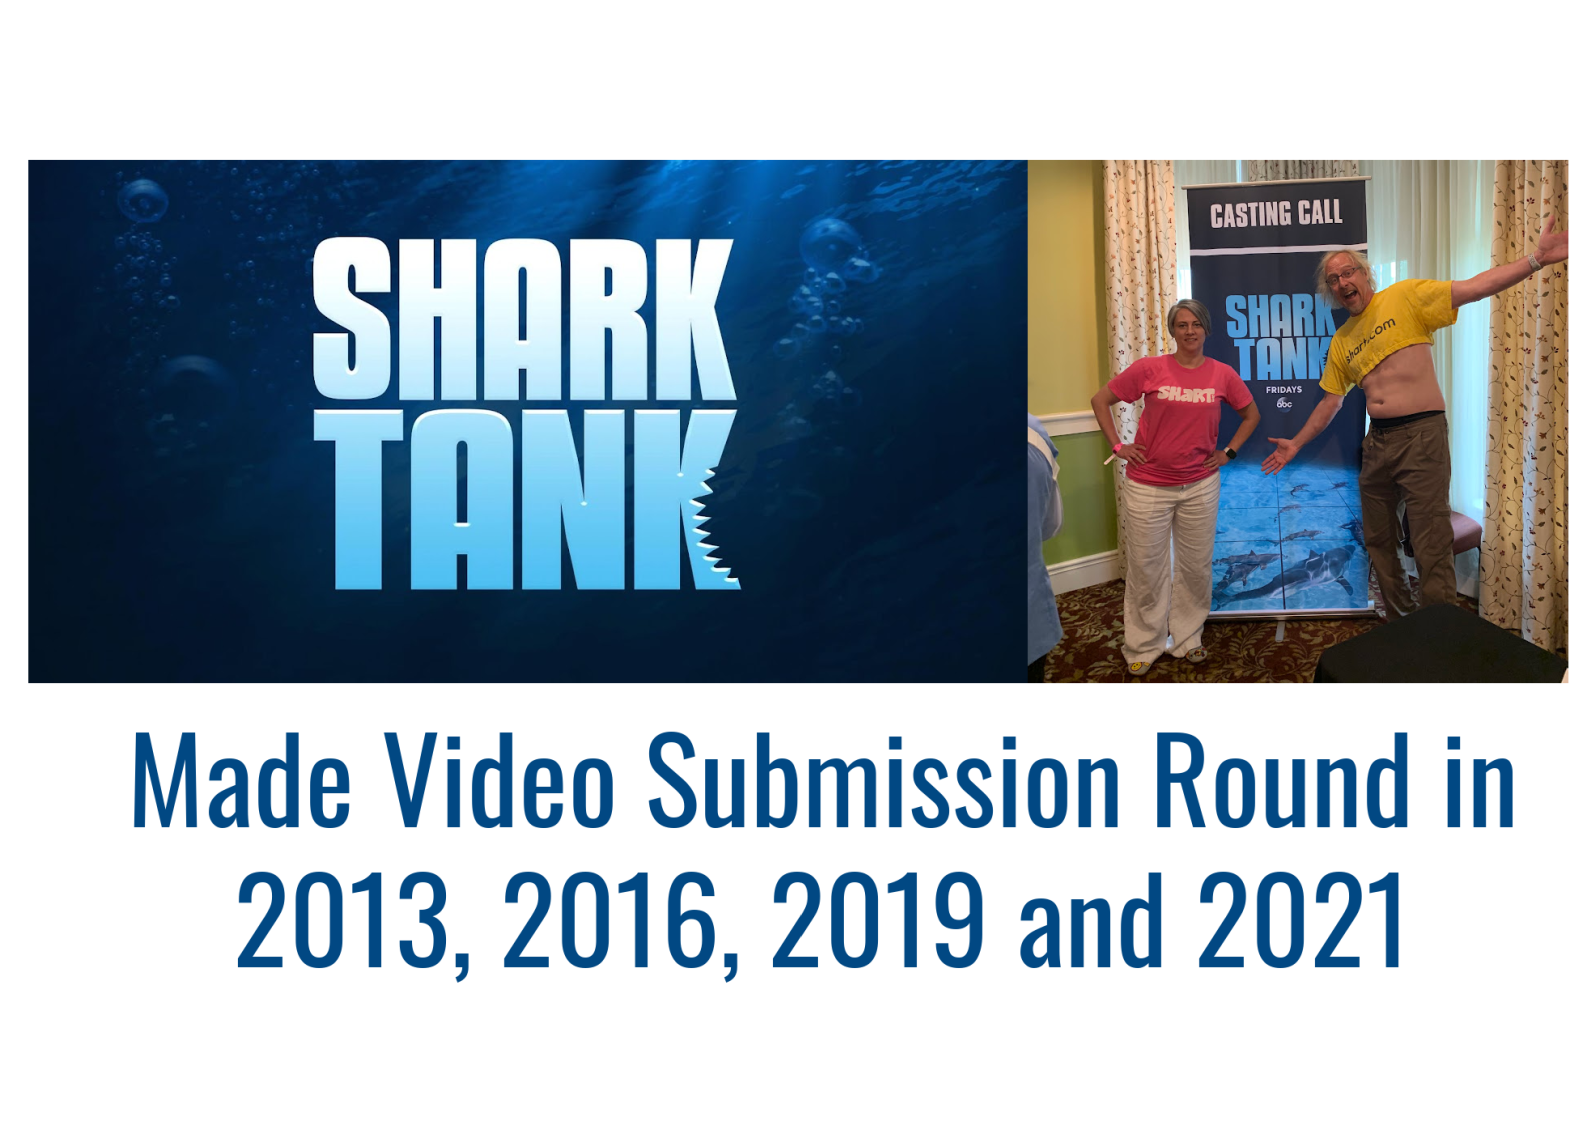 The Sharts at the Shark Tank Casting Call after Making Video Sumbission Round in 2013, 2016, 2019 and 2021